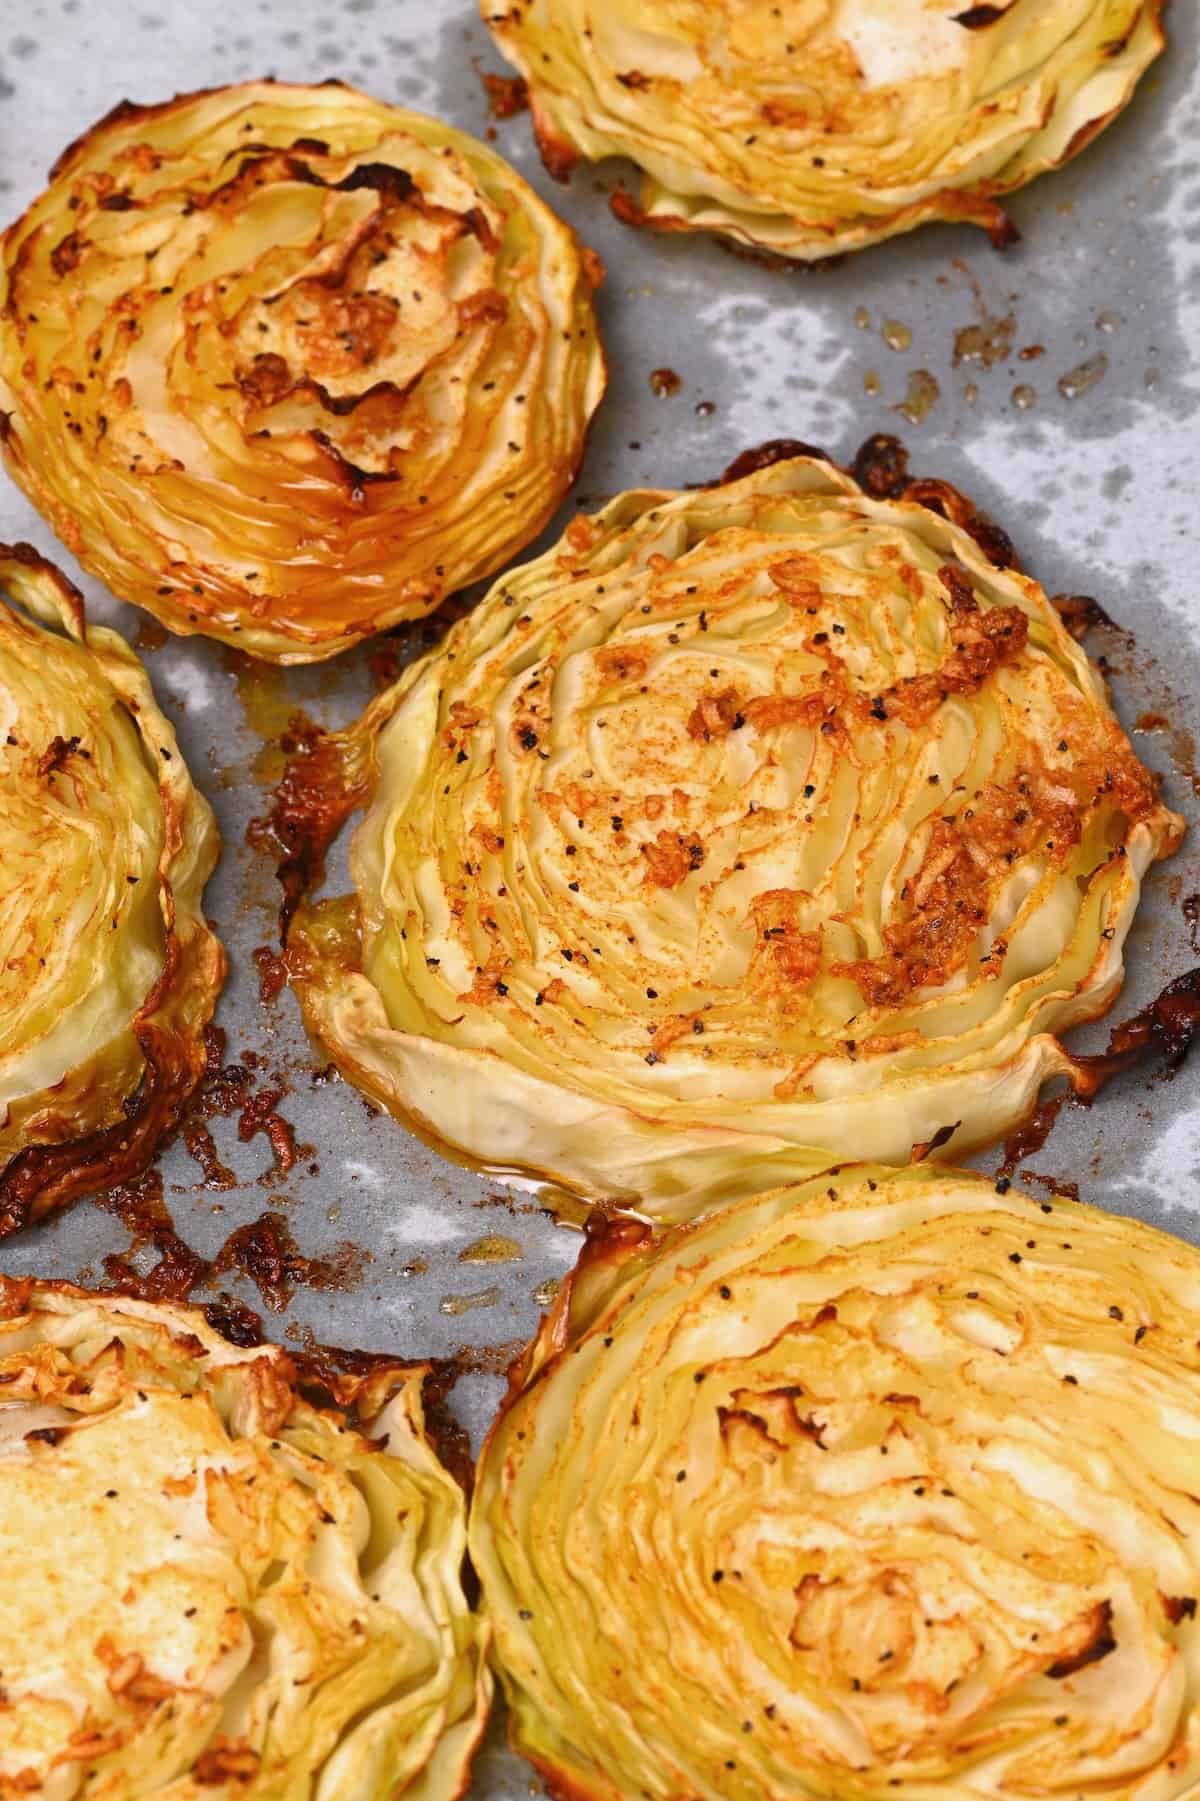 Oven-baked cabbage steaks